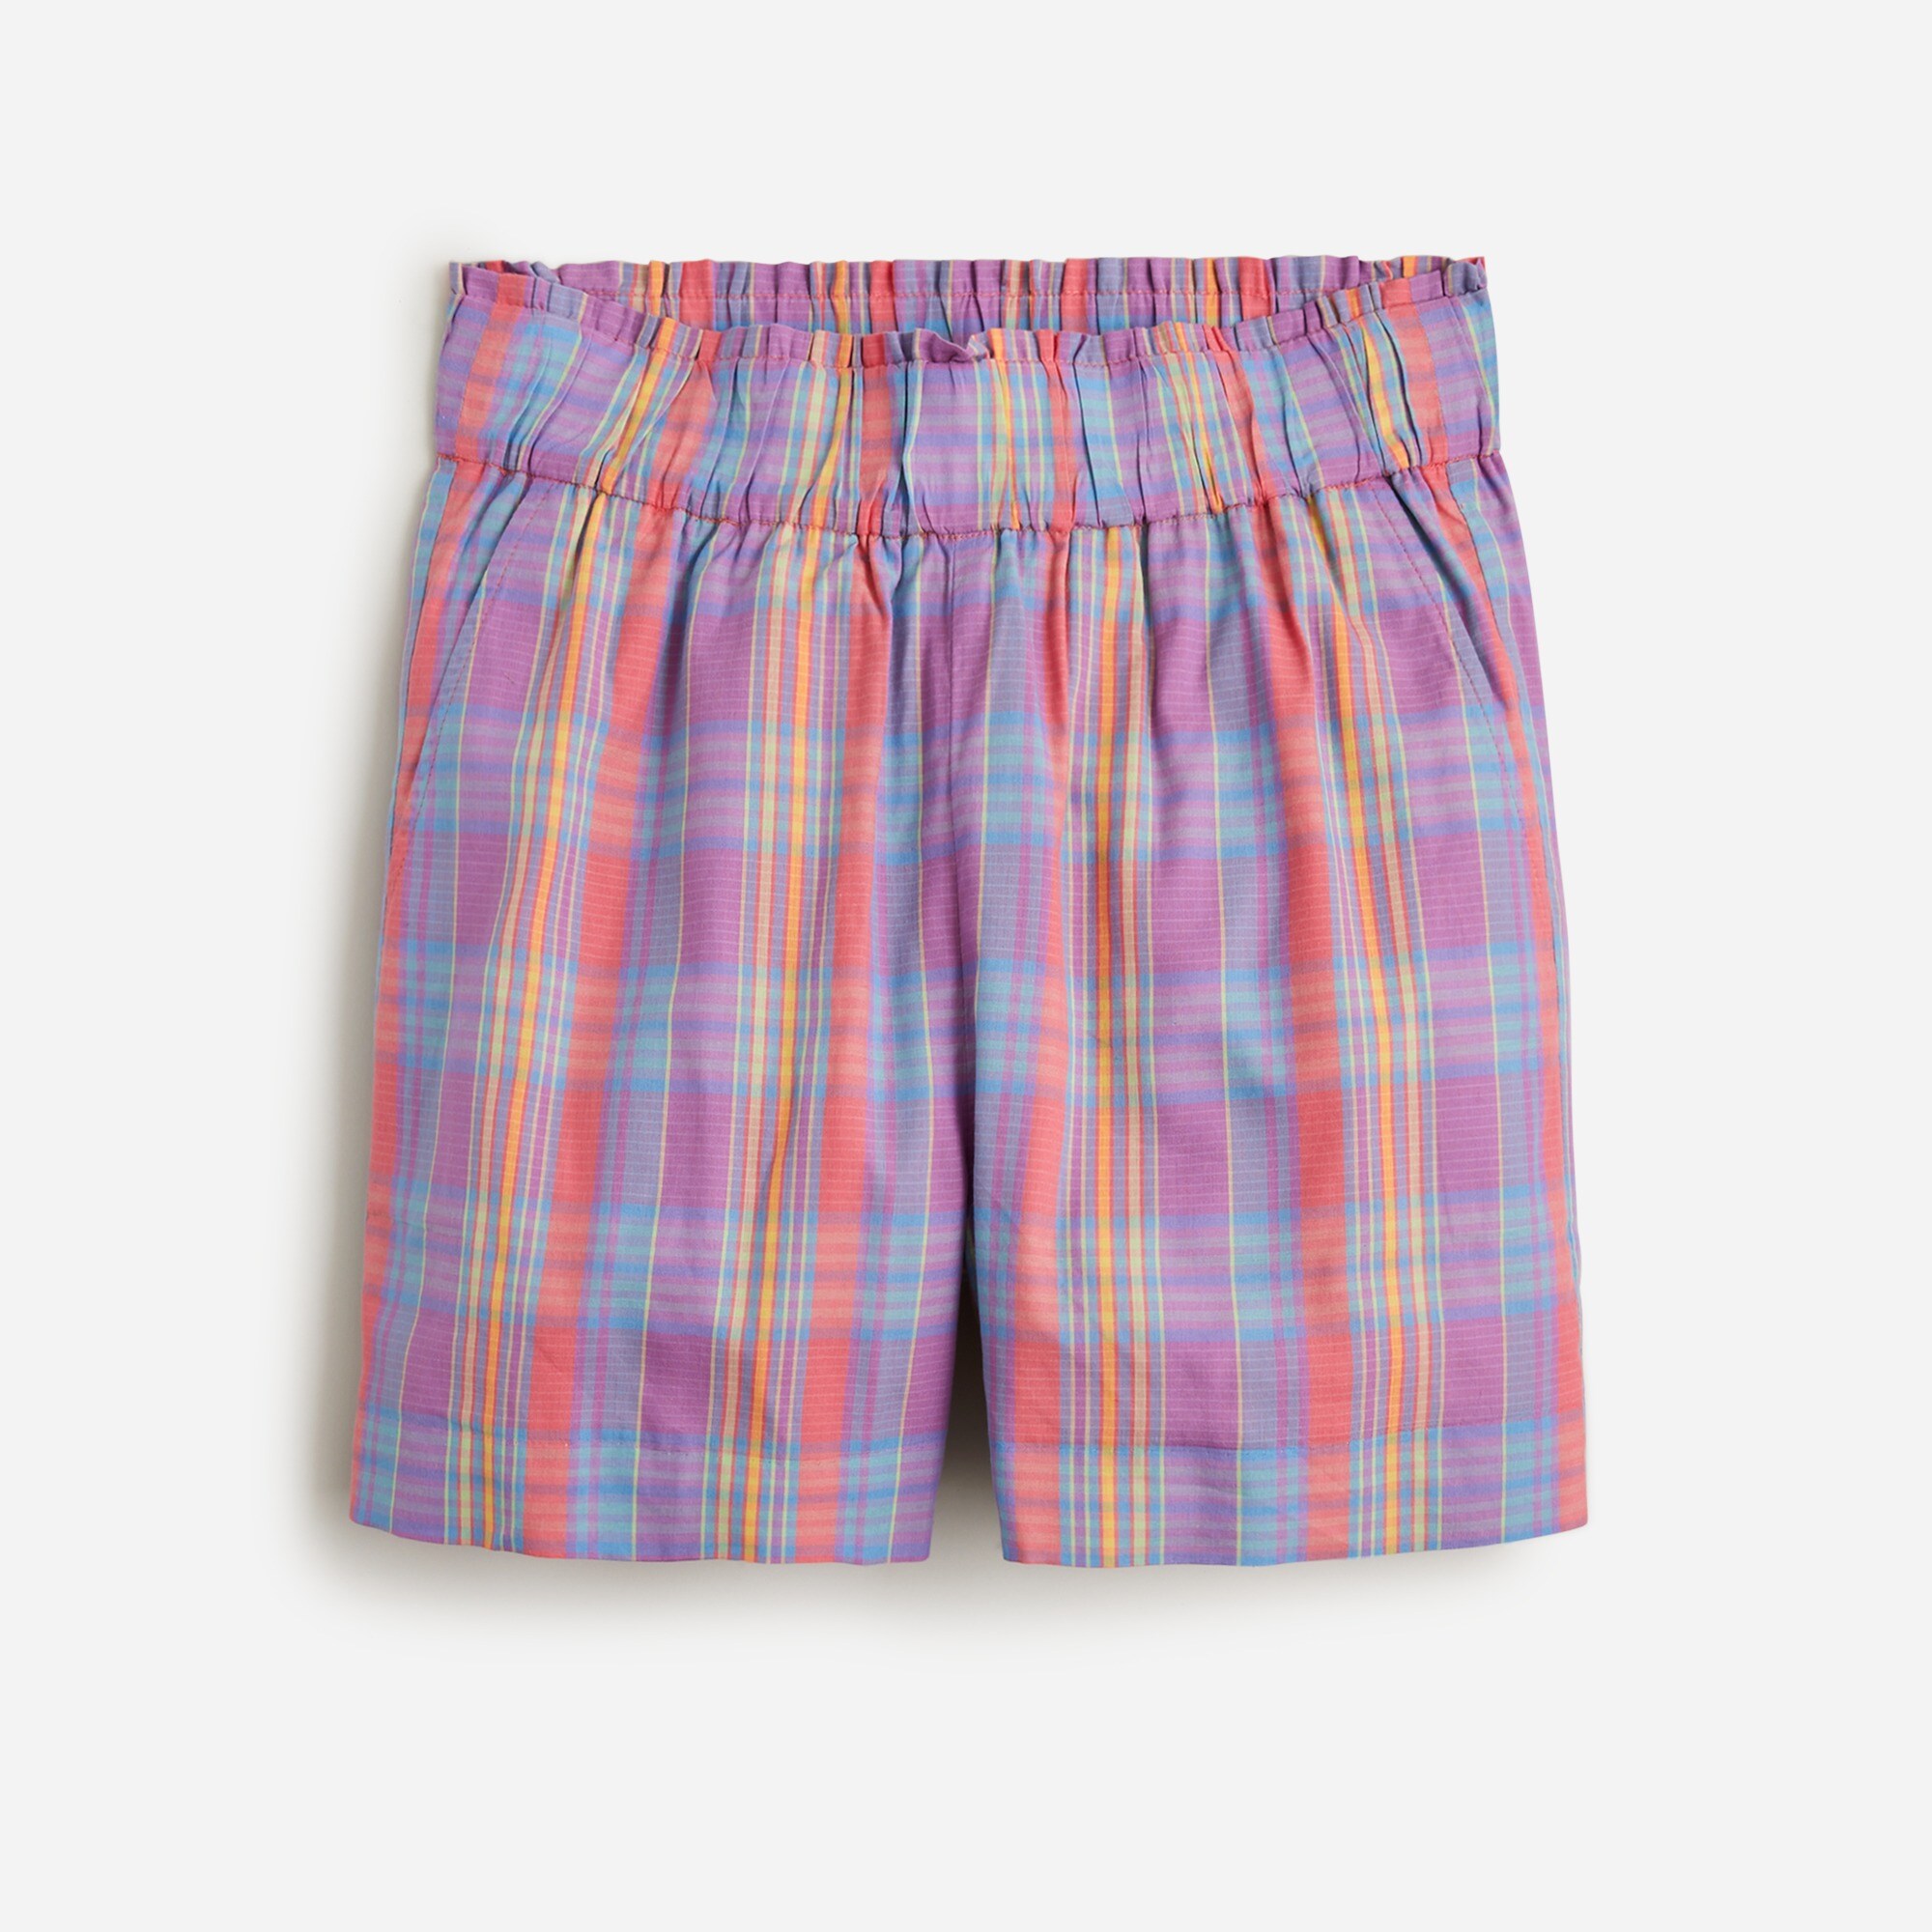  Pull-on short in sunset plaid